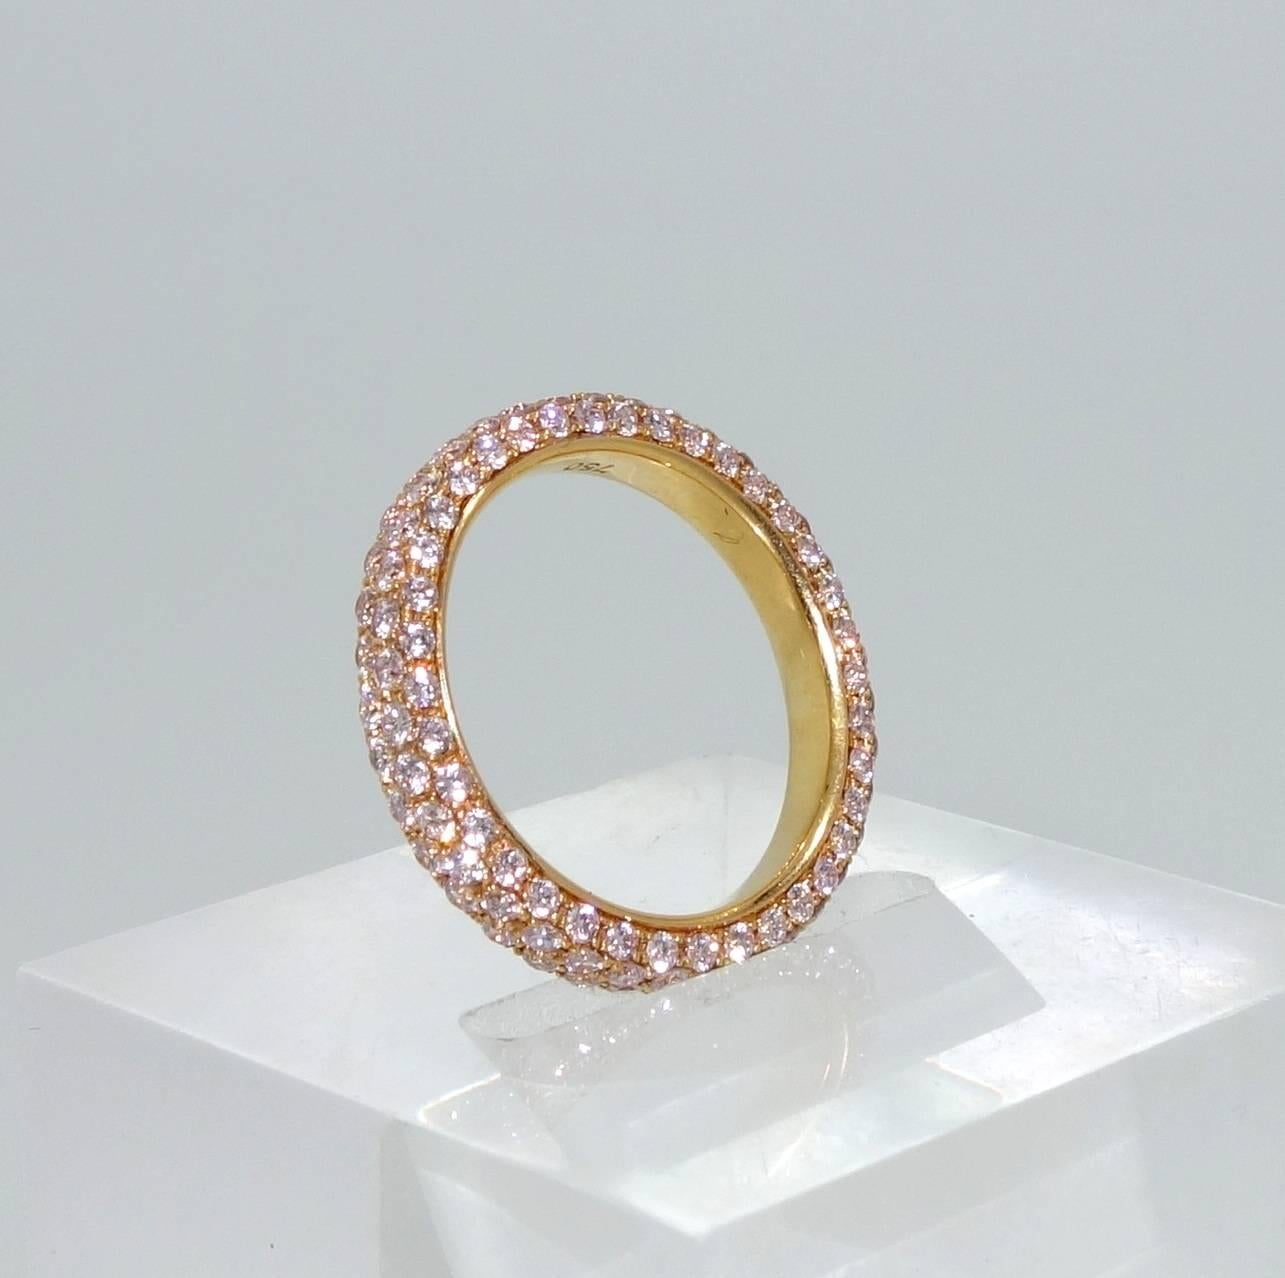 Well match and finely cut light fancy natural pink diamonds, over 100 diamonds, with an estimated diamond weight of 1.75 cts., these diamonds are pave set in this pink gold band which is a size 6.5.  The four rows of light pink diamonds create a